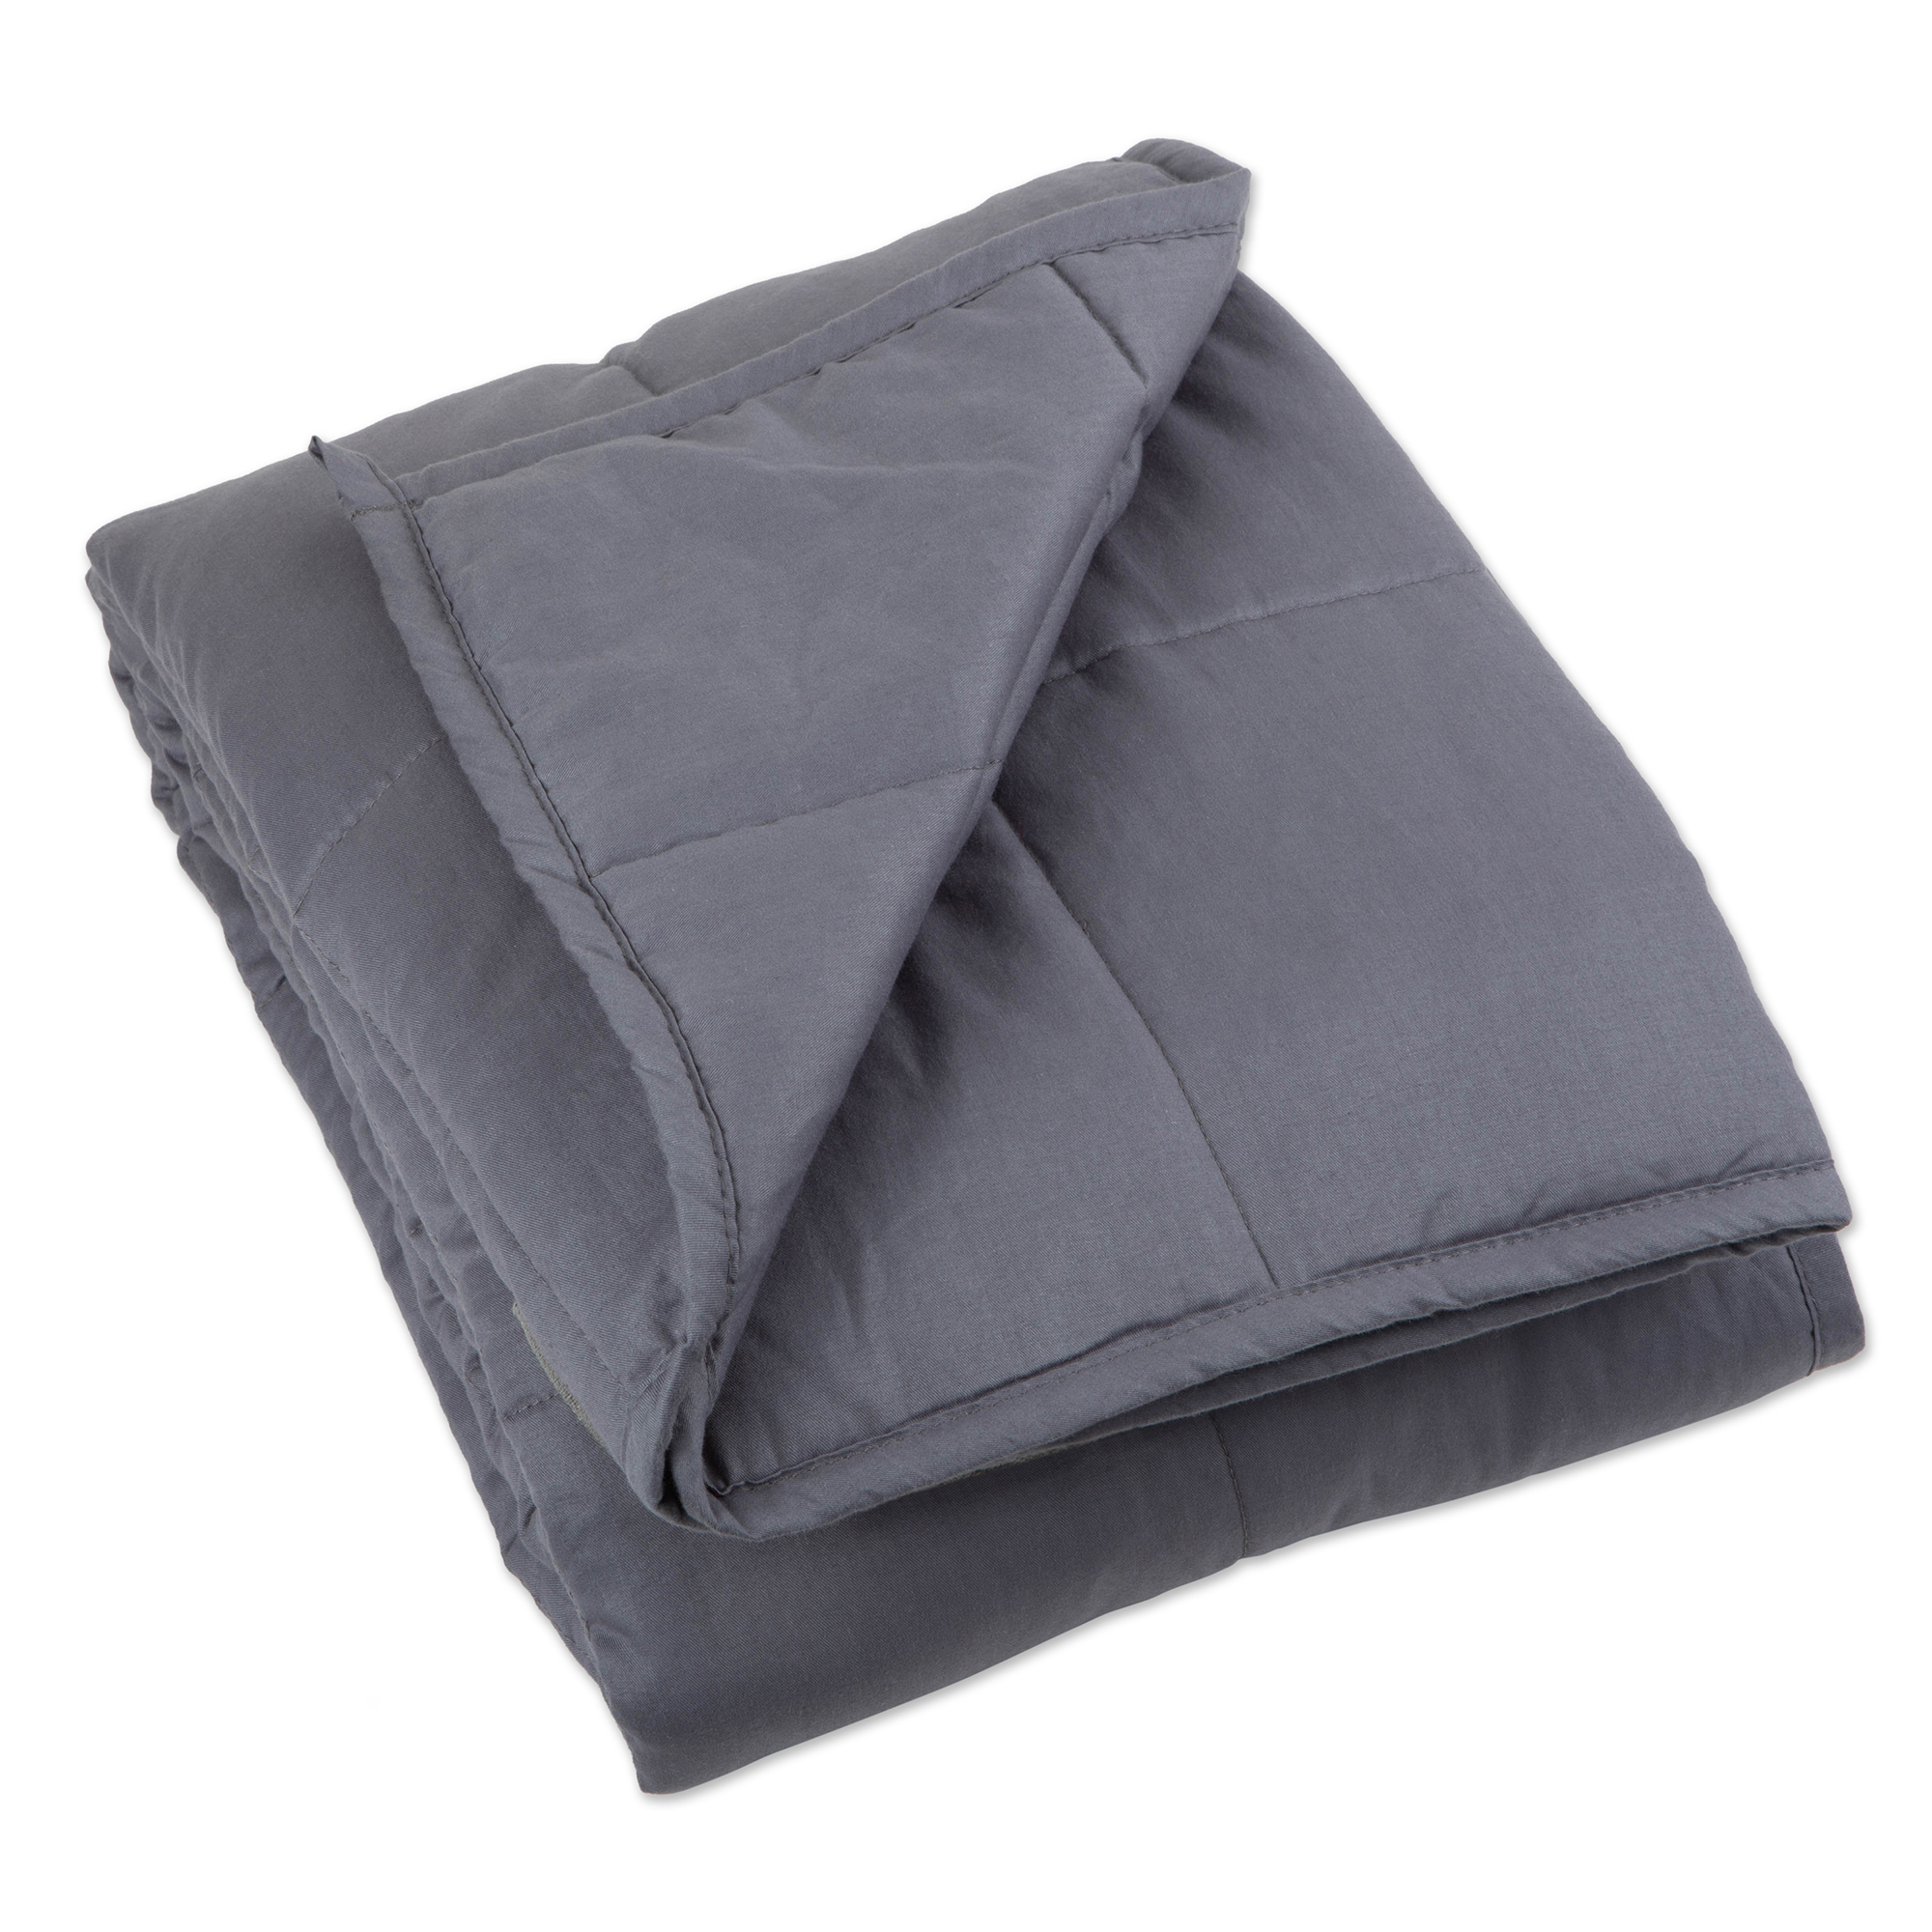 Bucky Weighted Blanket for Anxiety, ADHD, Autism, Insomnia, Stress ...